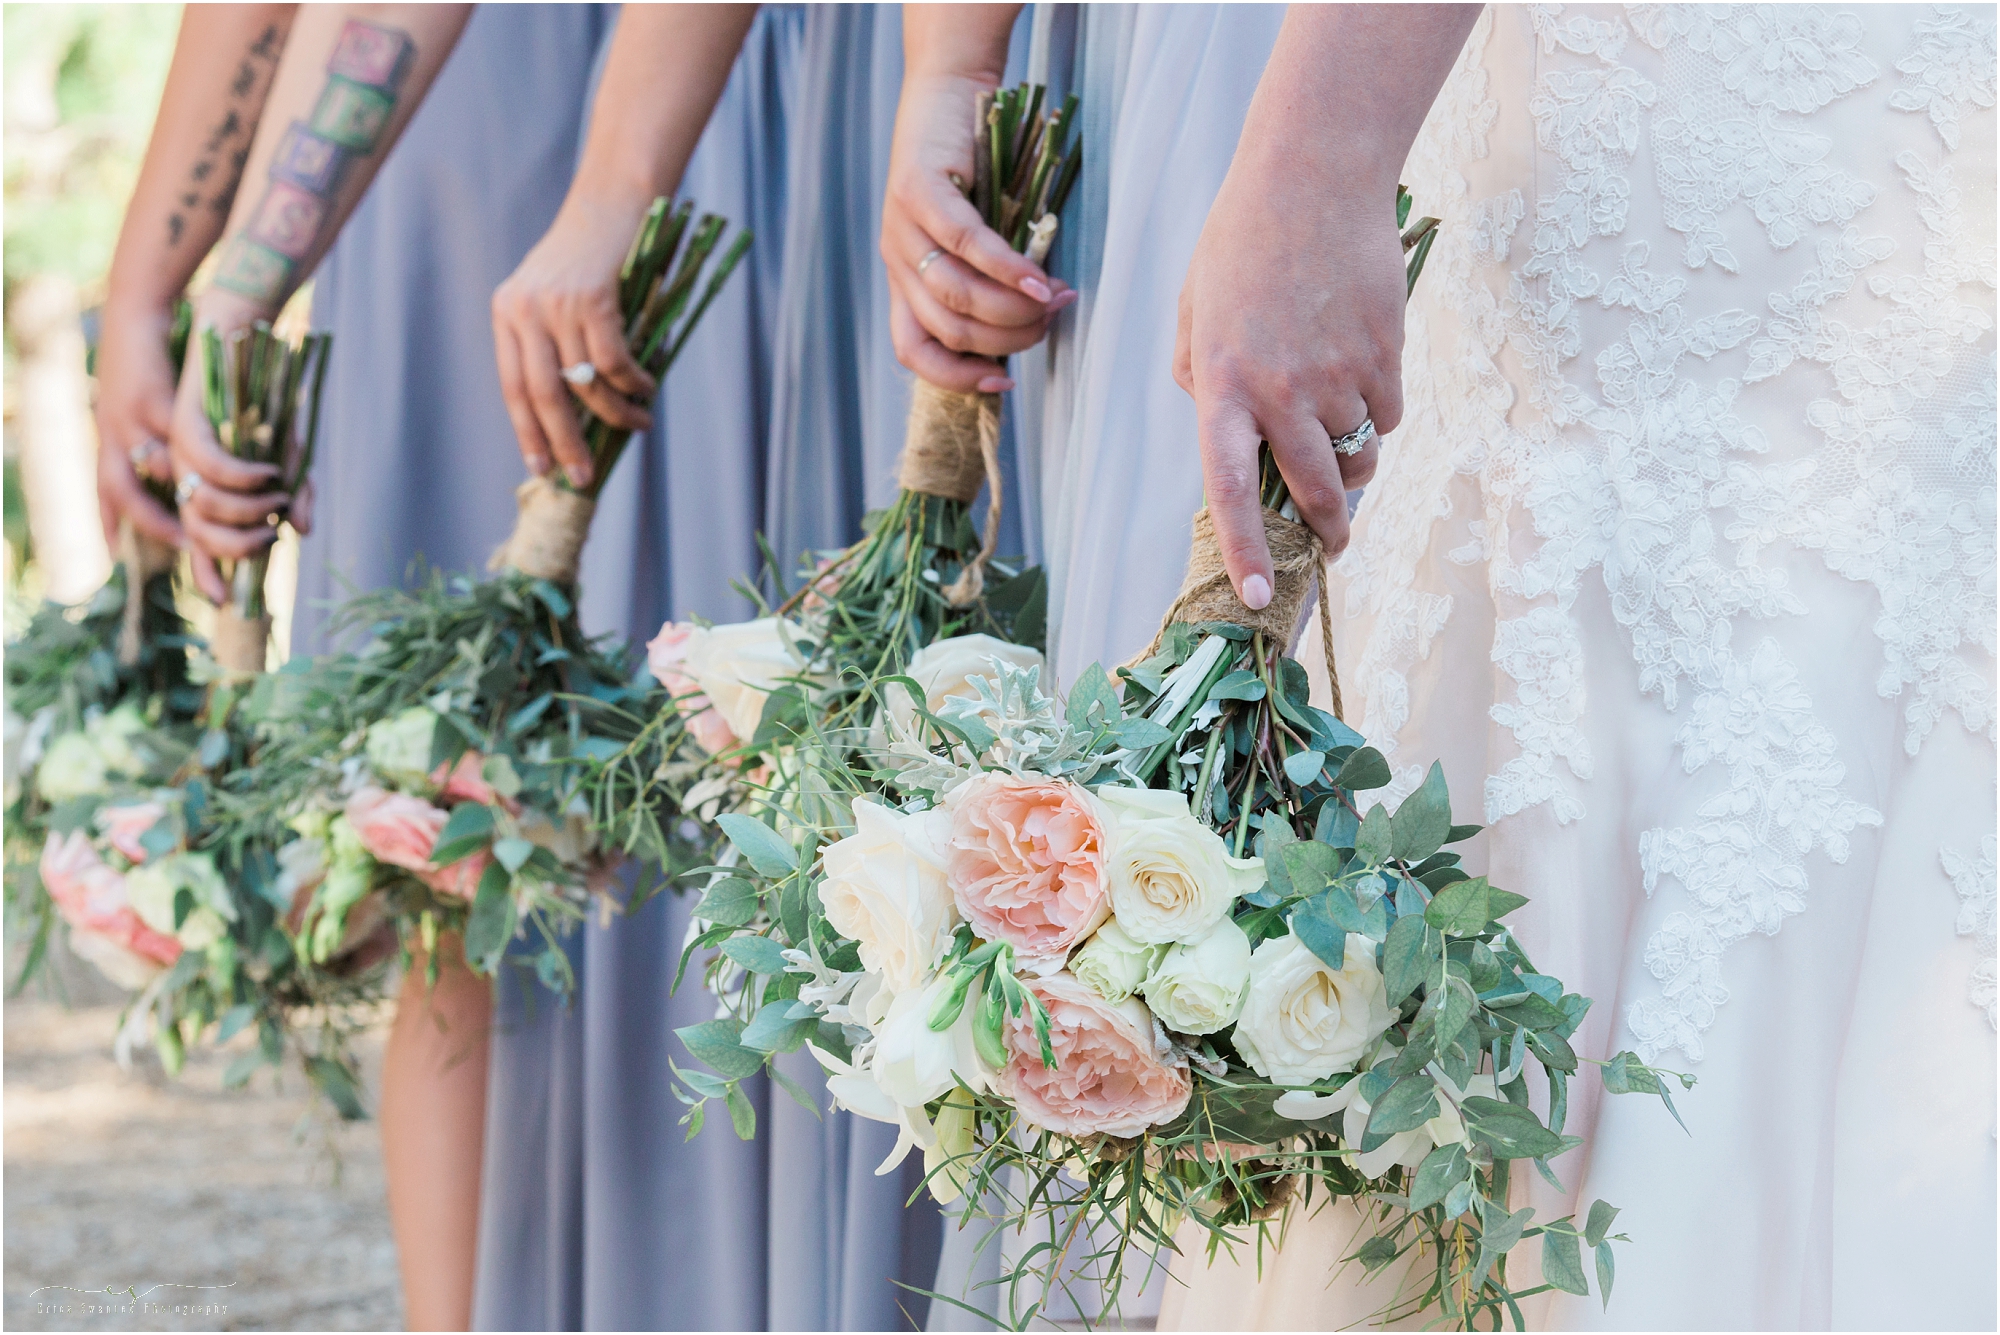 A different take on the bridal bouquet photograph from Bend, OR wedding photographer Erica Swantek Photography.